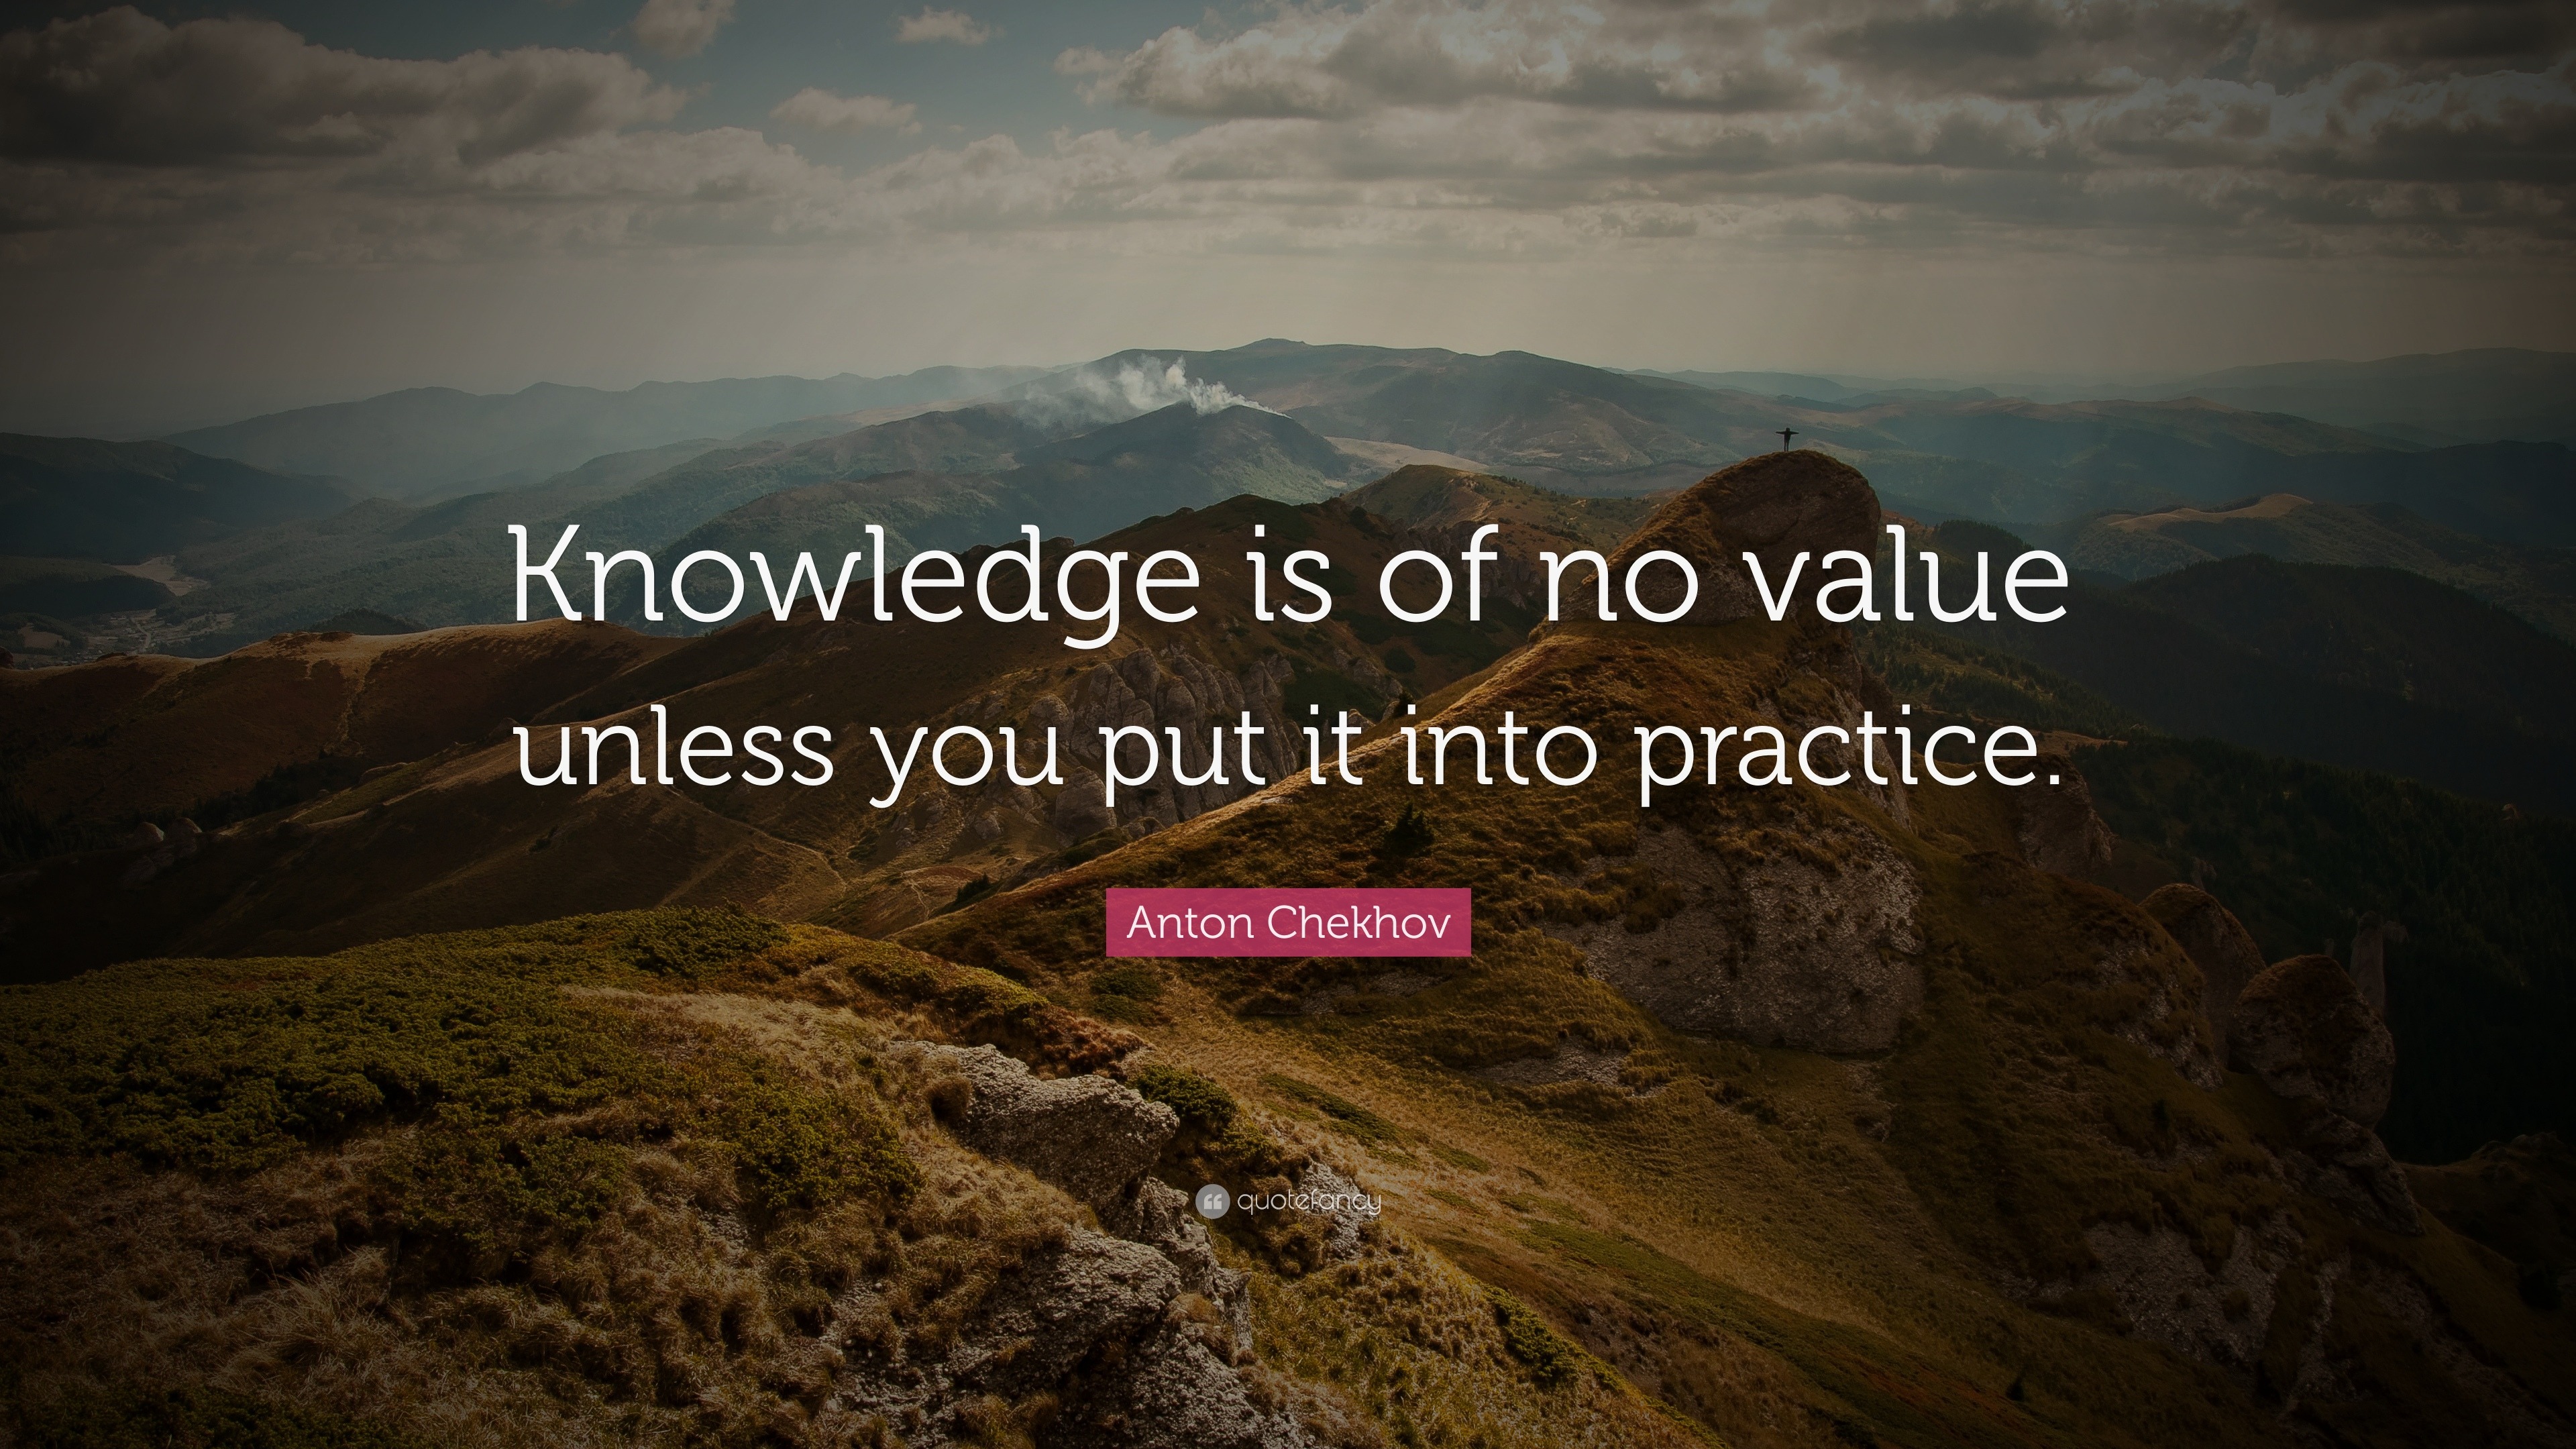 Anton Chekhov Quote: “Knowledge is of no value unless you put it into practice ...3840 x 2160